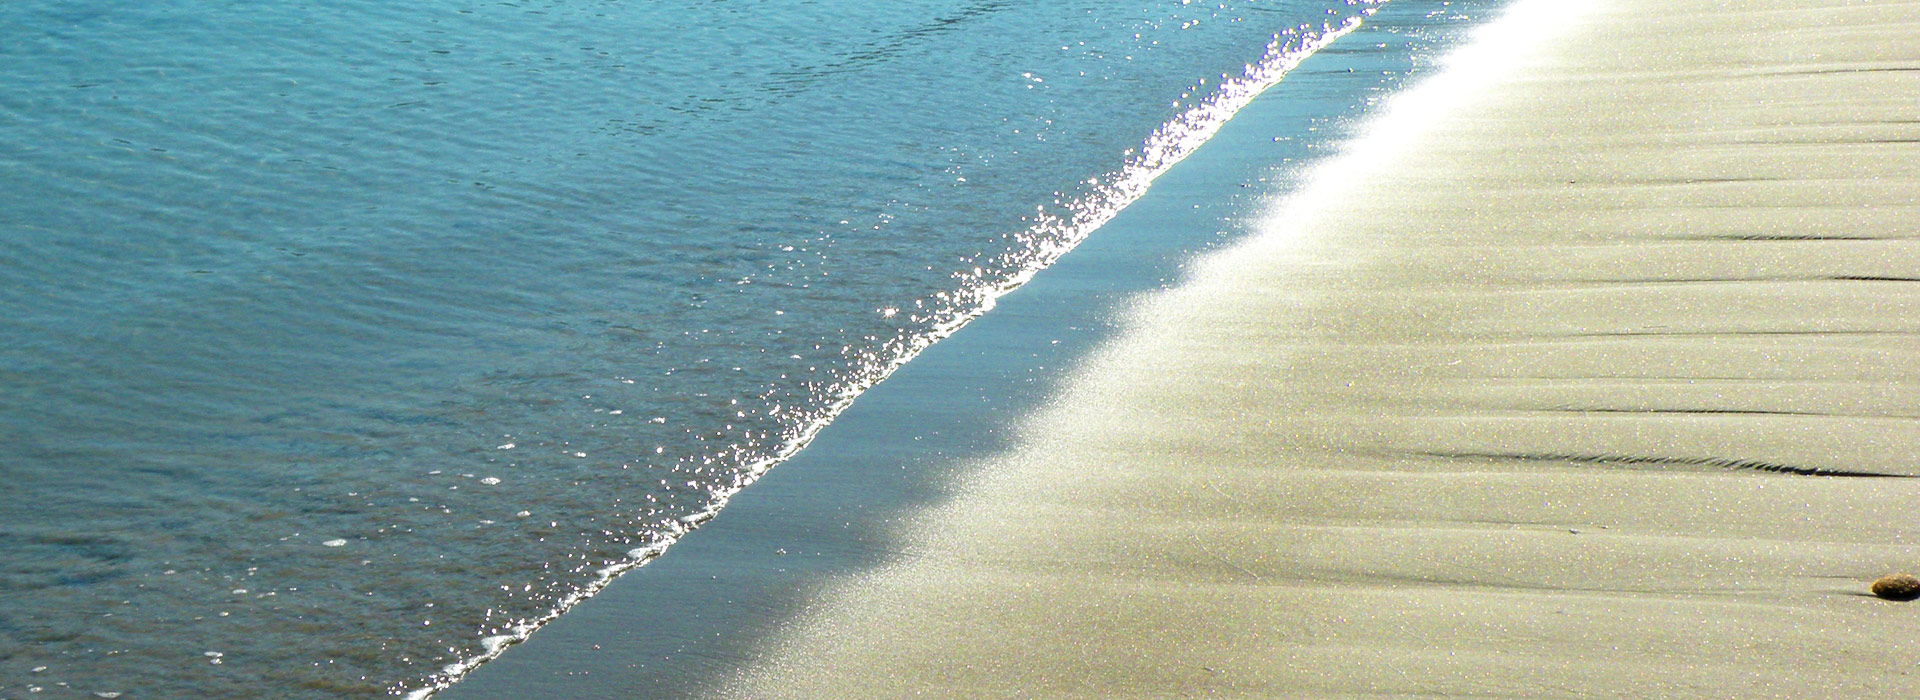 The Poetto sand and sea